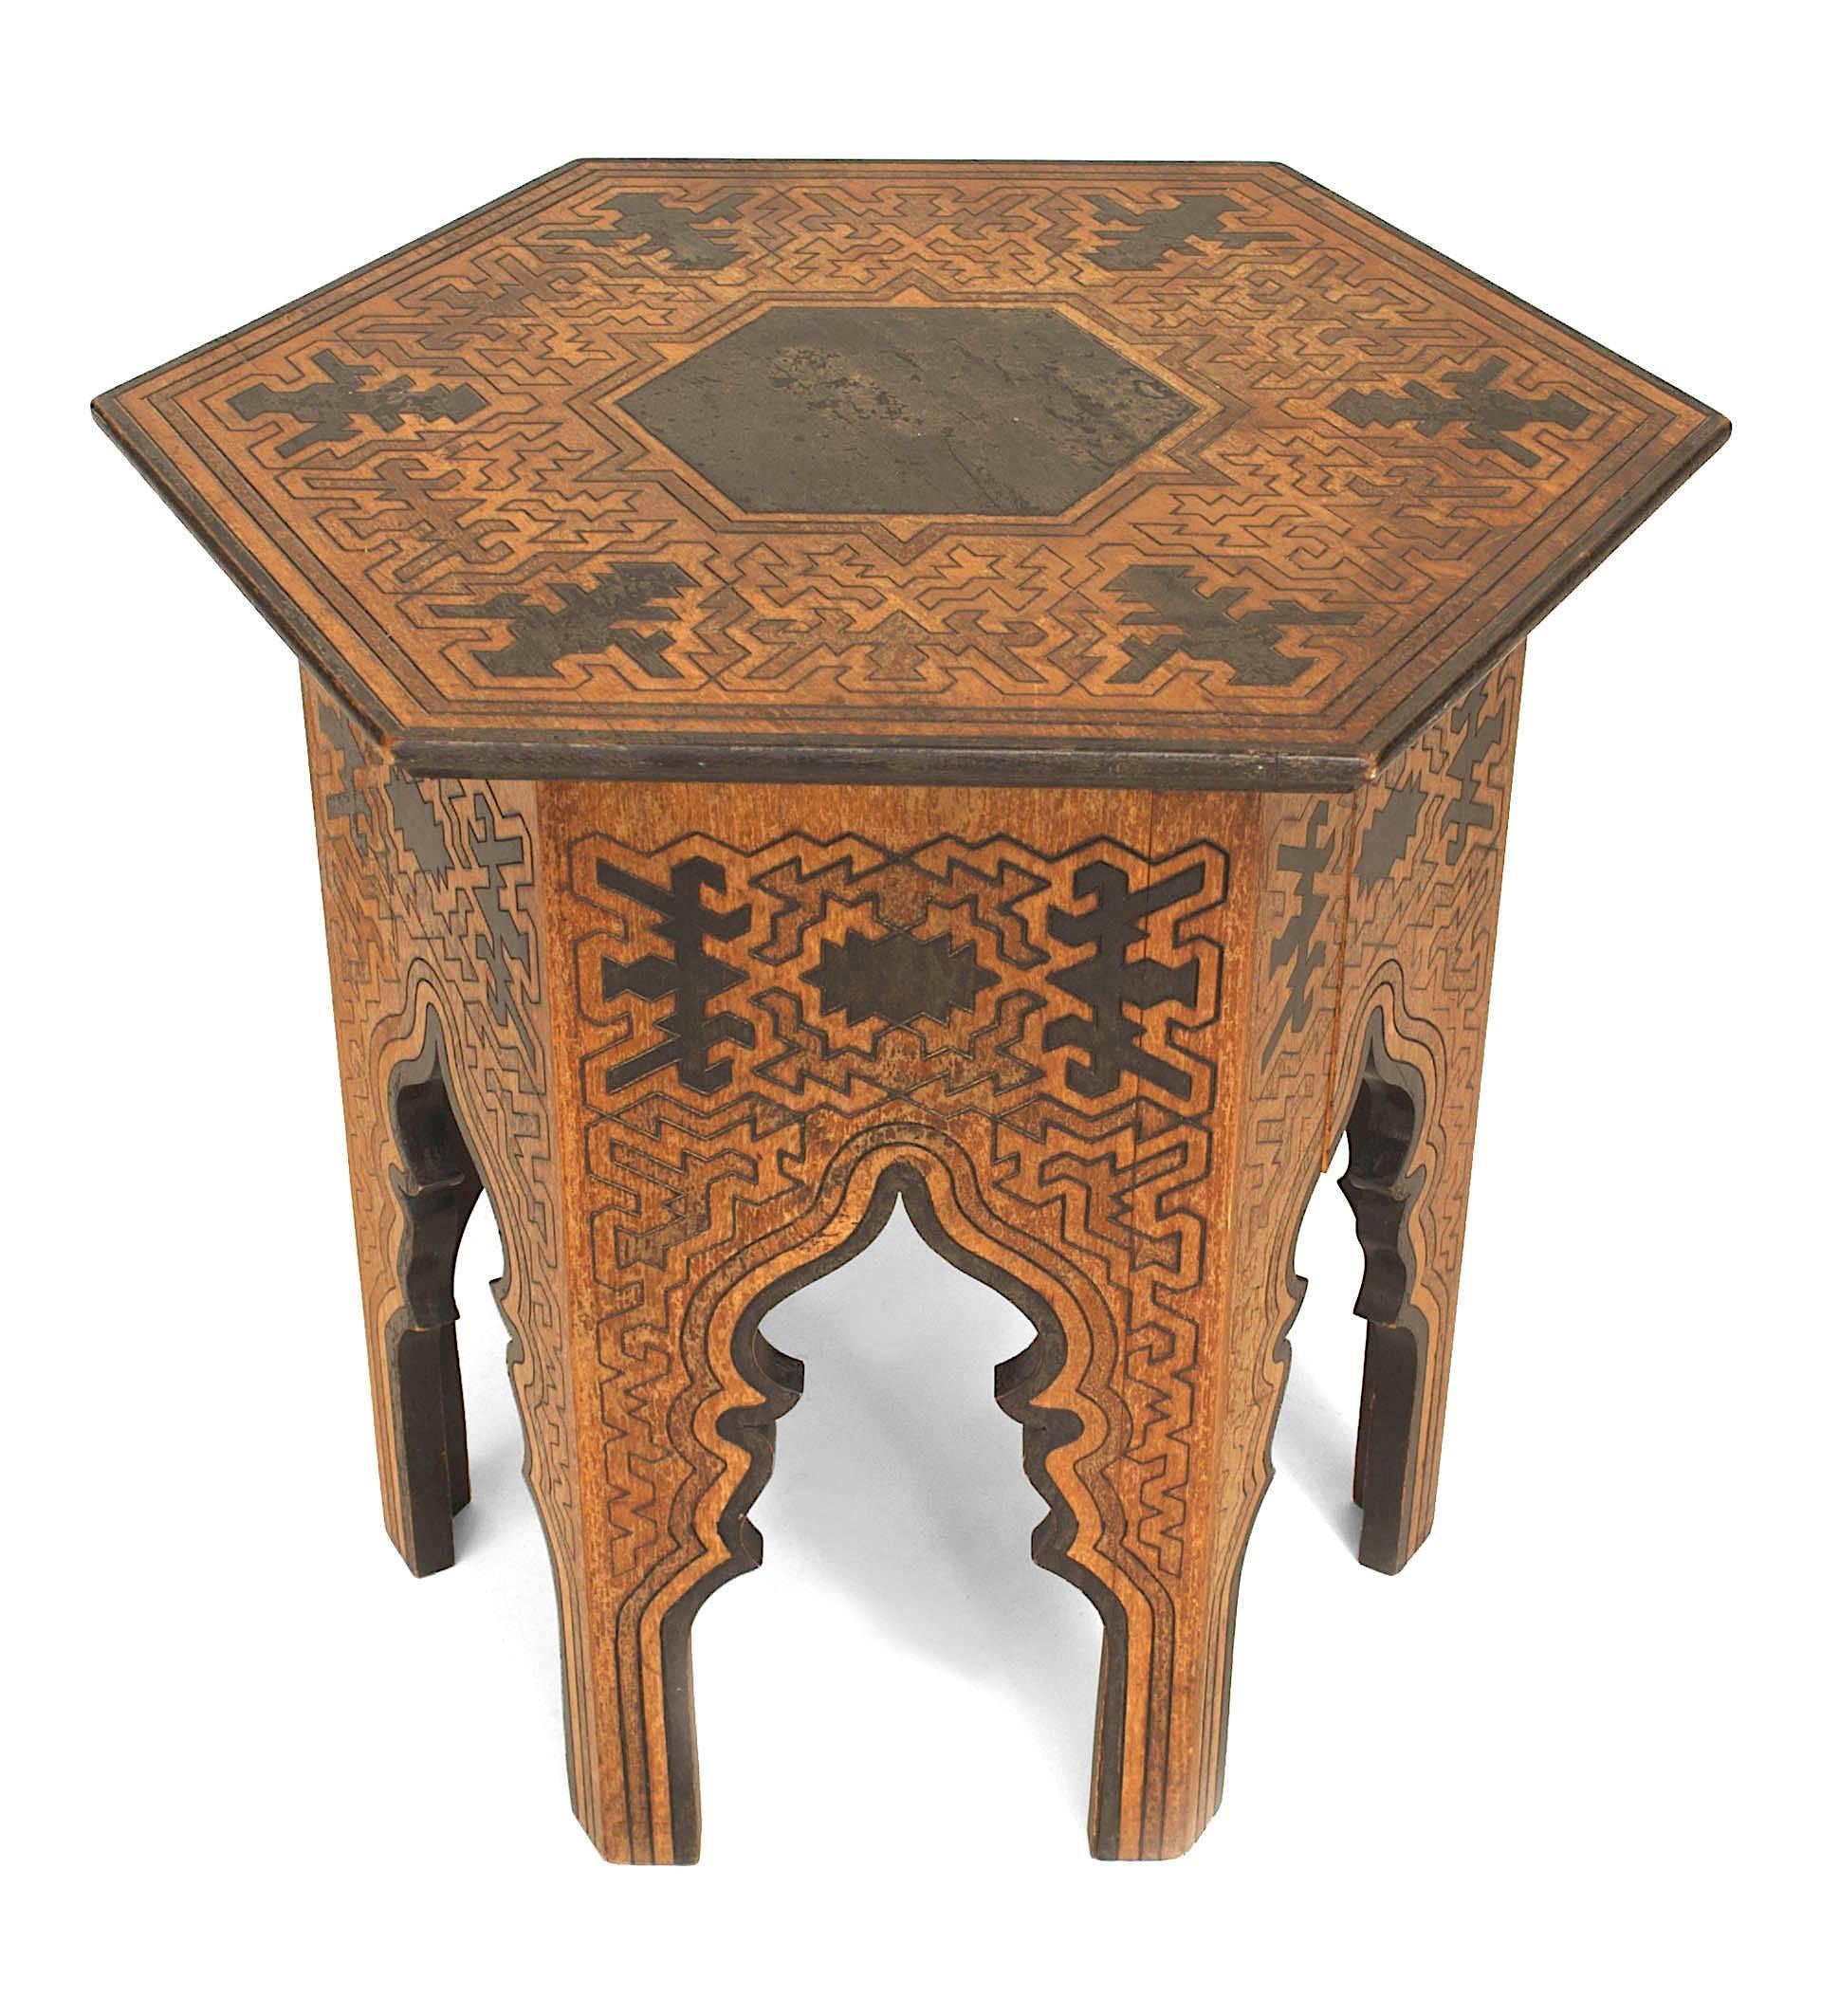 Middle Eastern Moorish-style (probably American 1890s) six-sided low table (taboret) with a geometric etched and ebonized burnt wood design with arch forms on base.
